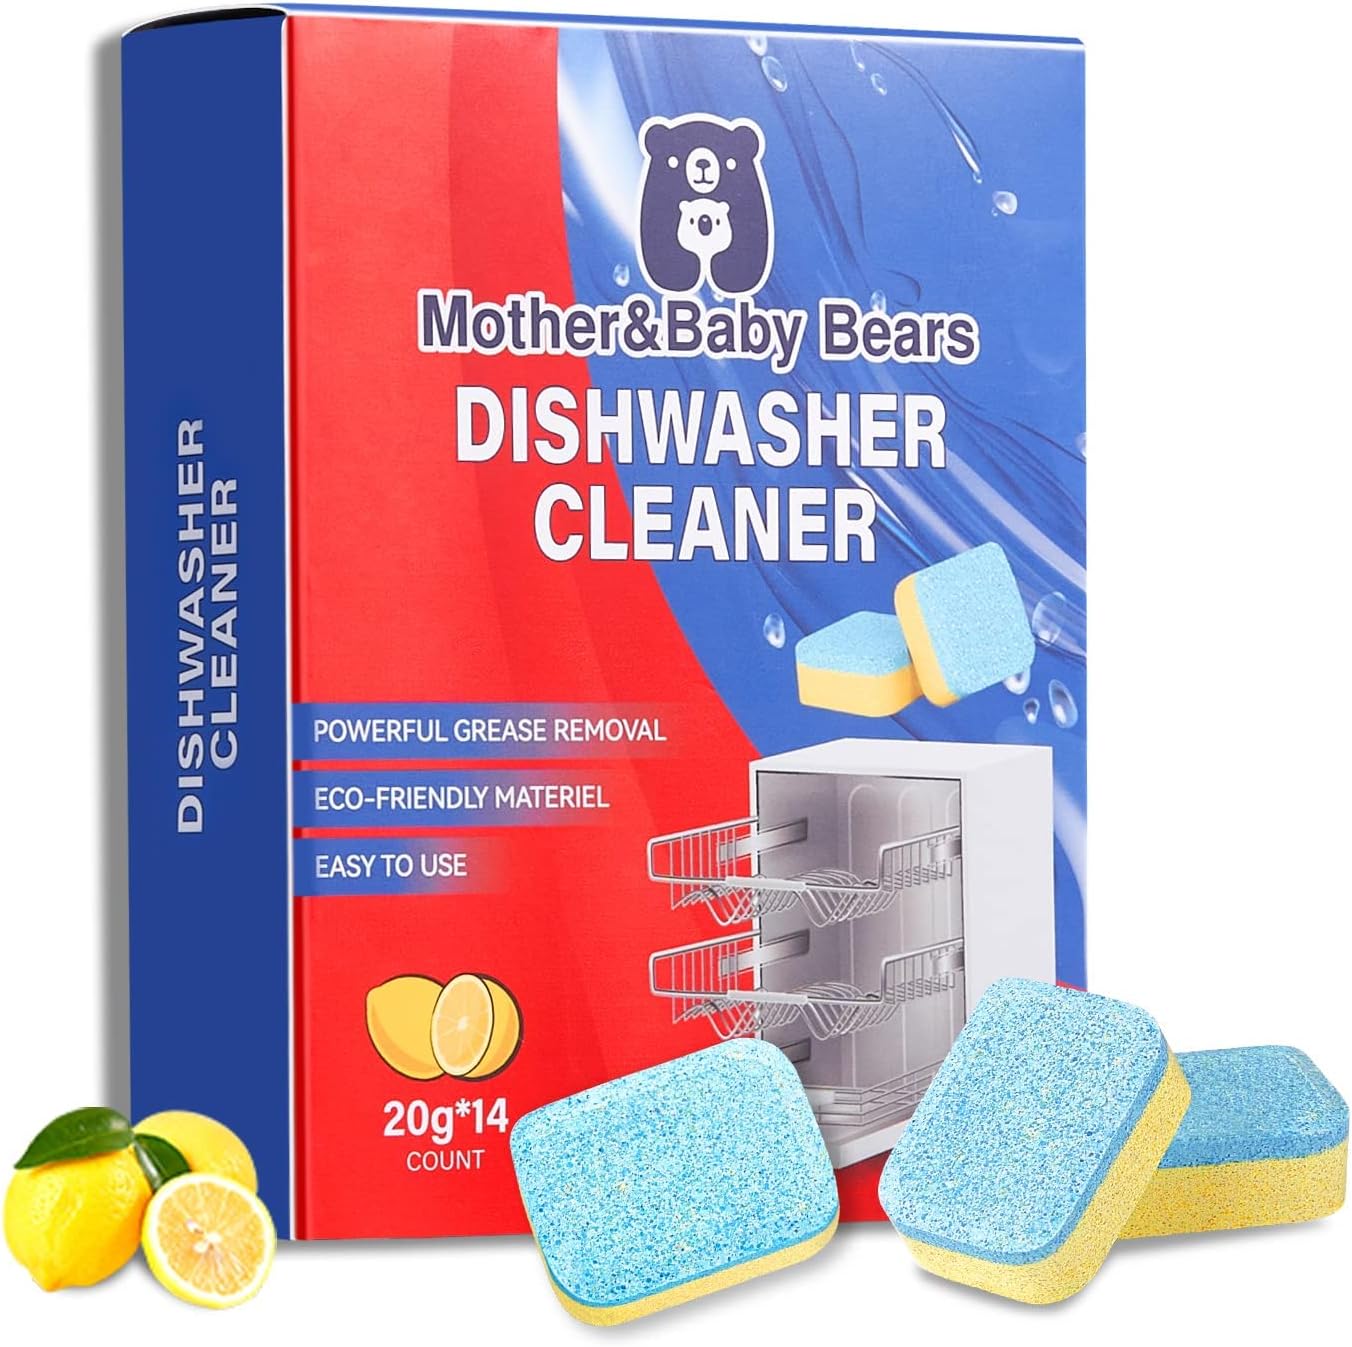 Dishwasher Cleaner Tablets, 14 Count Natural Dishwasher Cleaner and Deodorizer, Remove Grease, Limescale, Odor, Calcium, Septic Safe